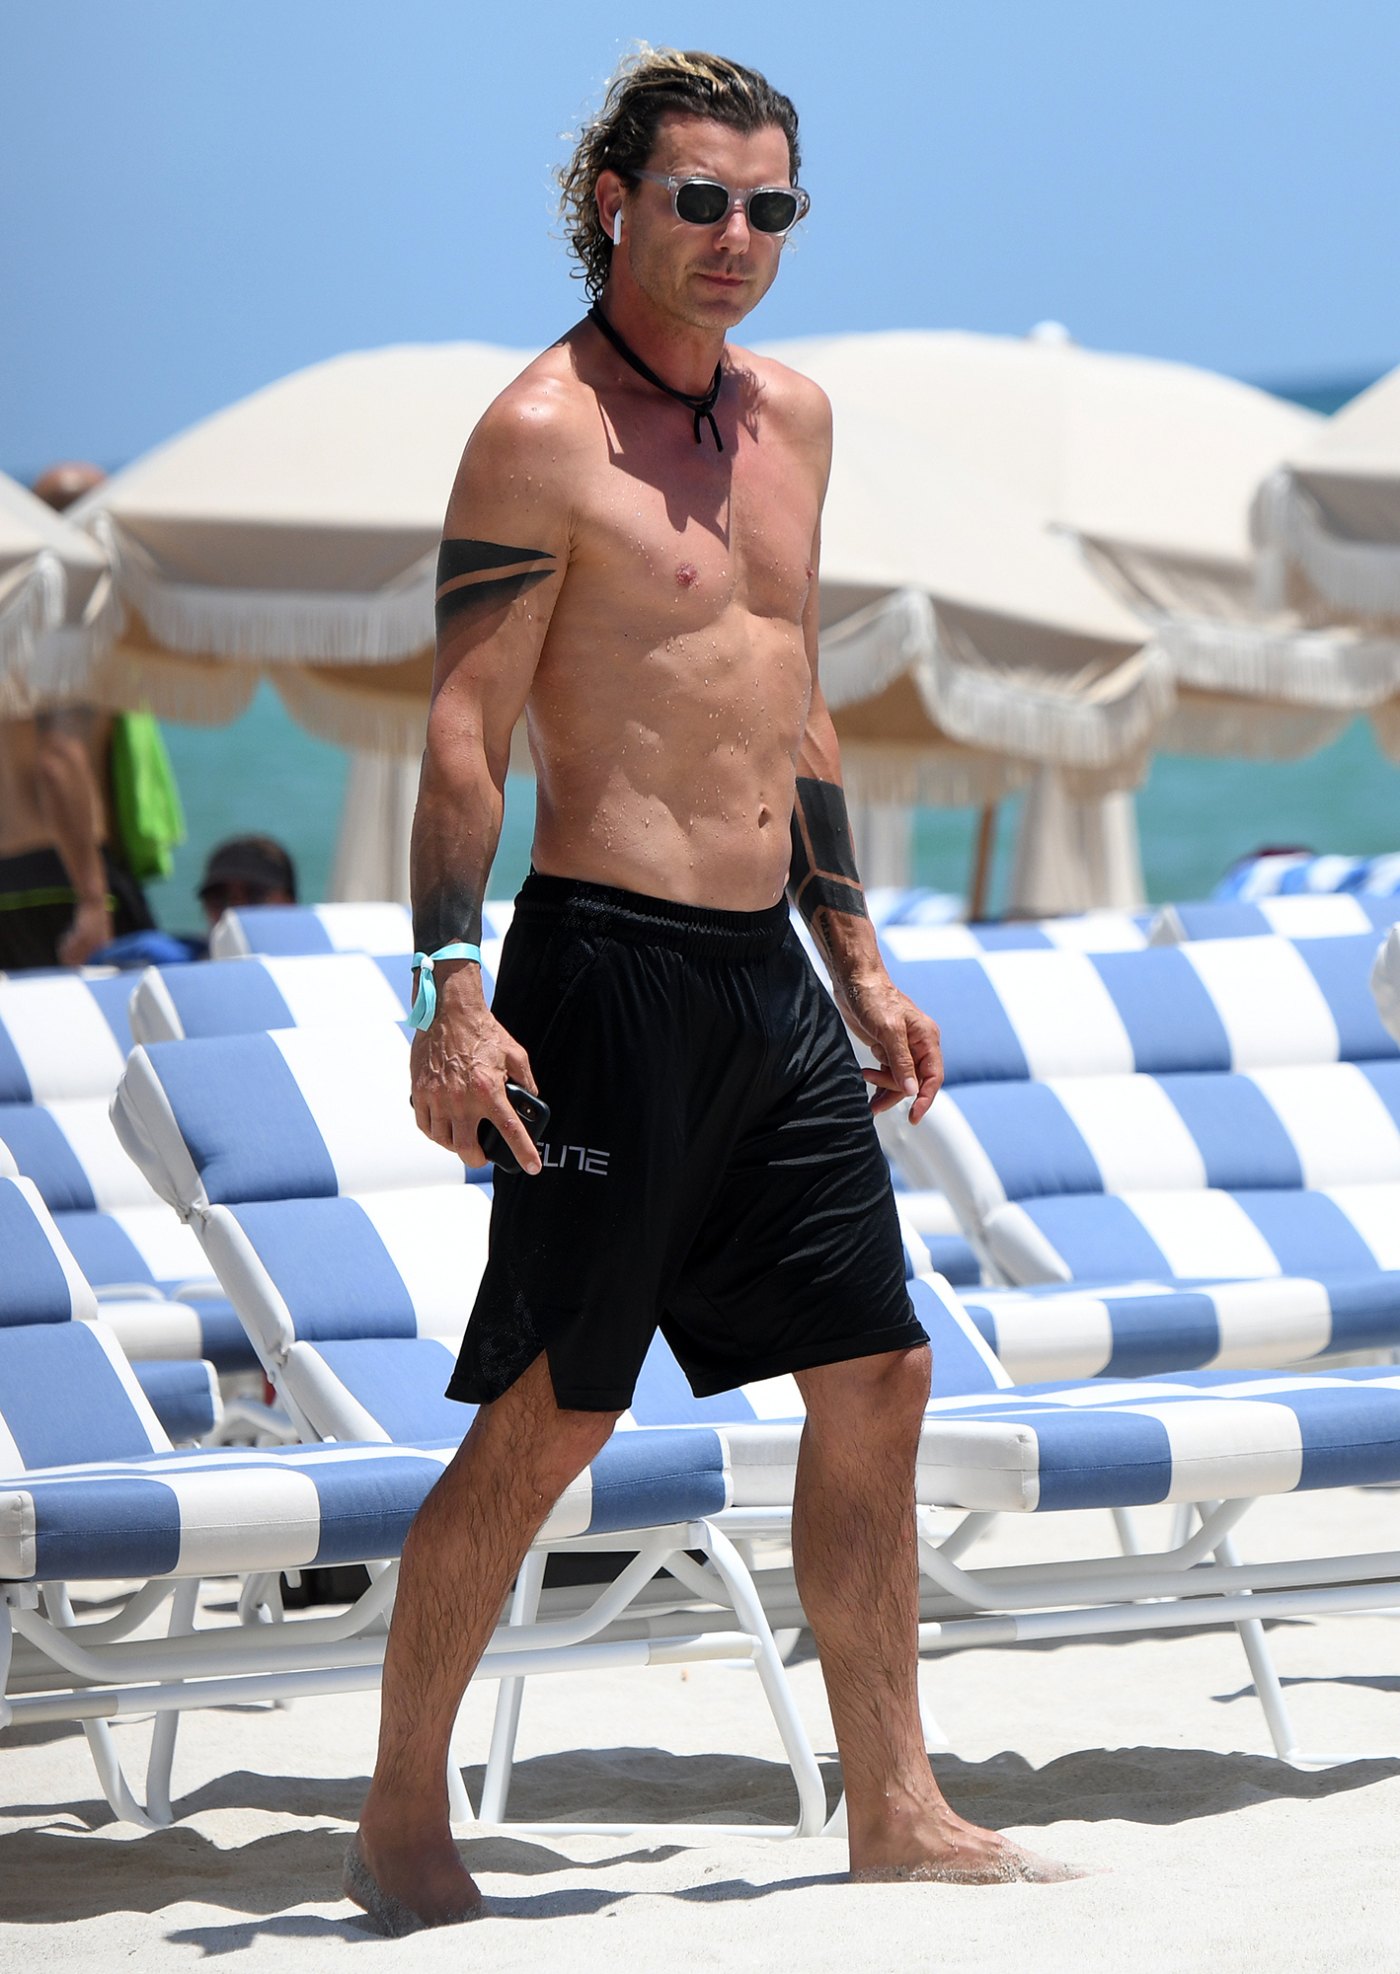 Hottest Celebrity Men At The Beach In Swim Trunks Shirtless